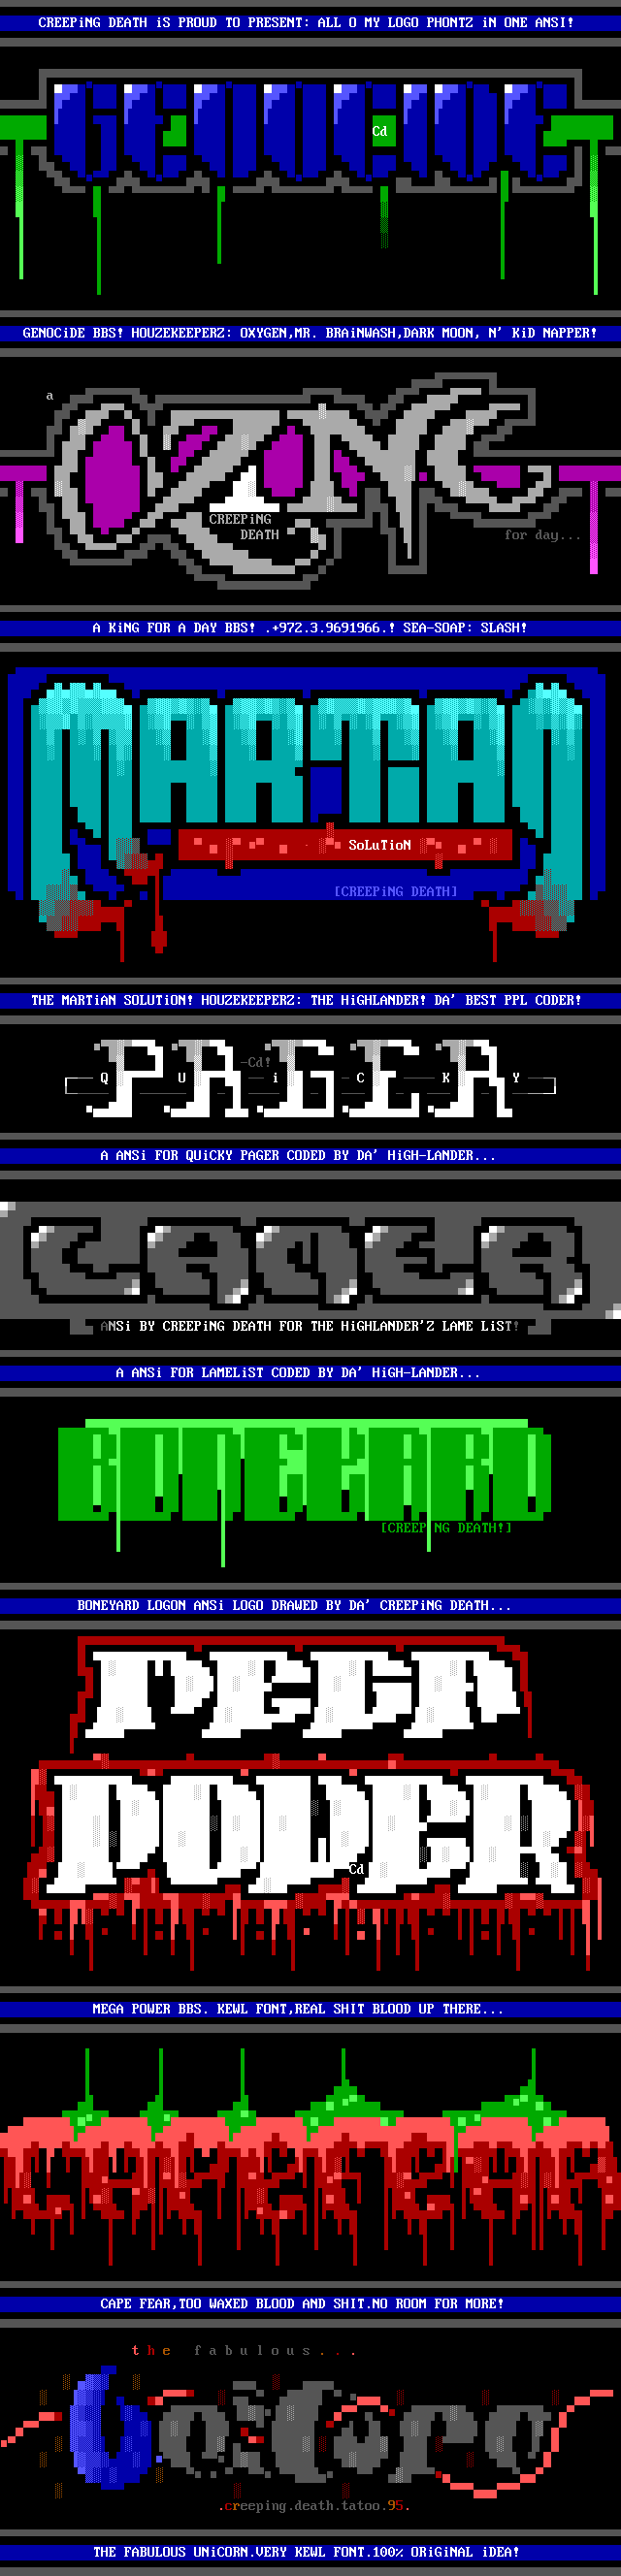 aNSI lOGiS cOL. #1 by cREEPiNG dEATH